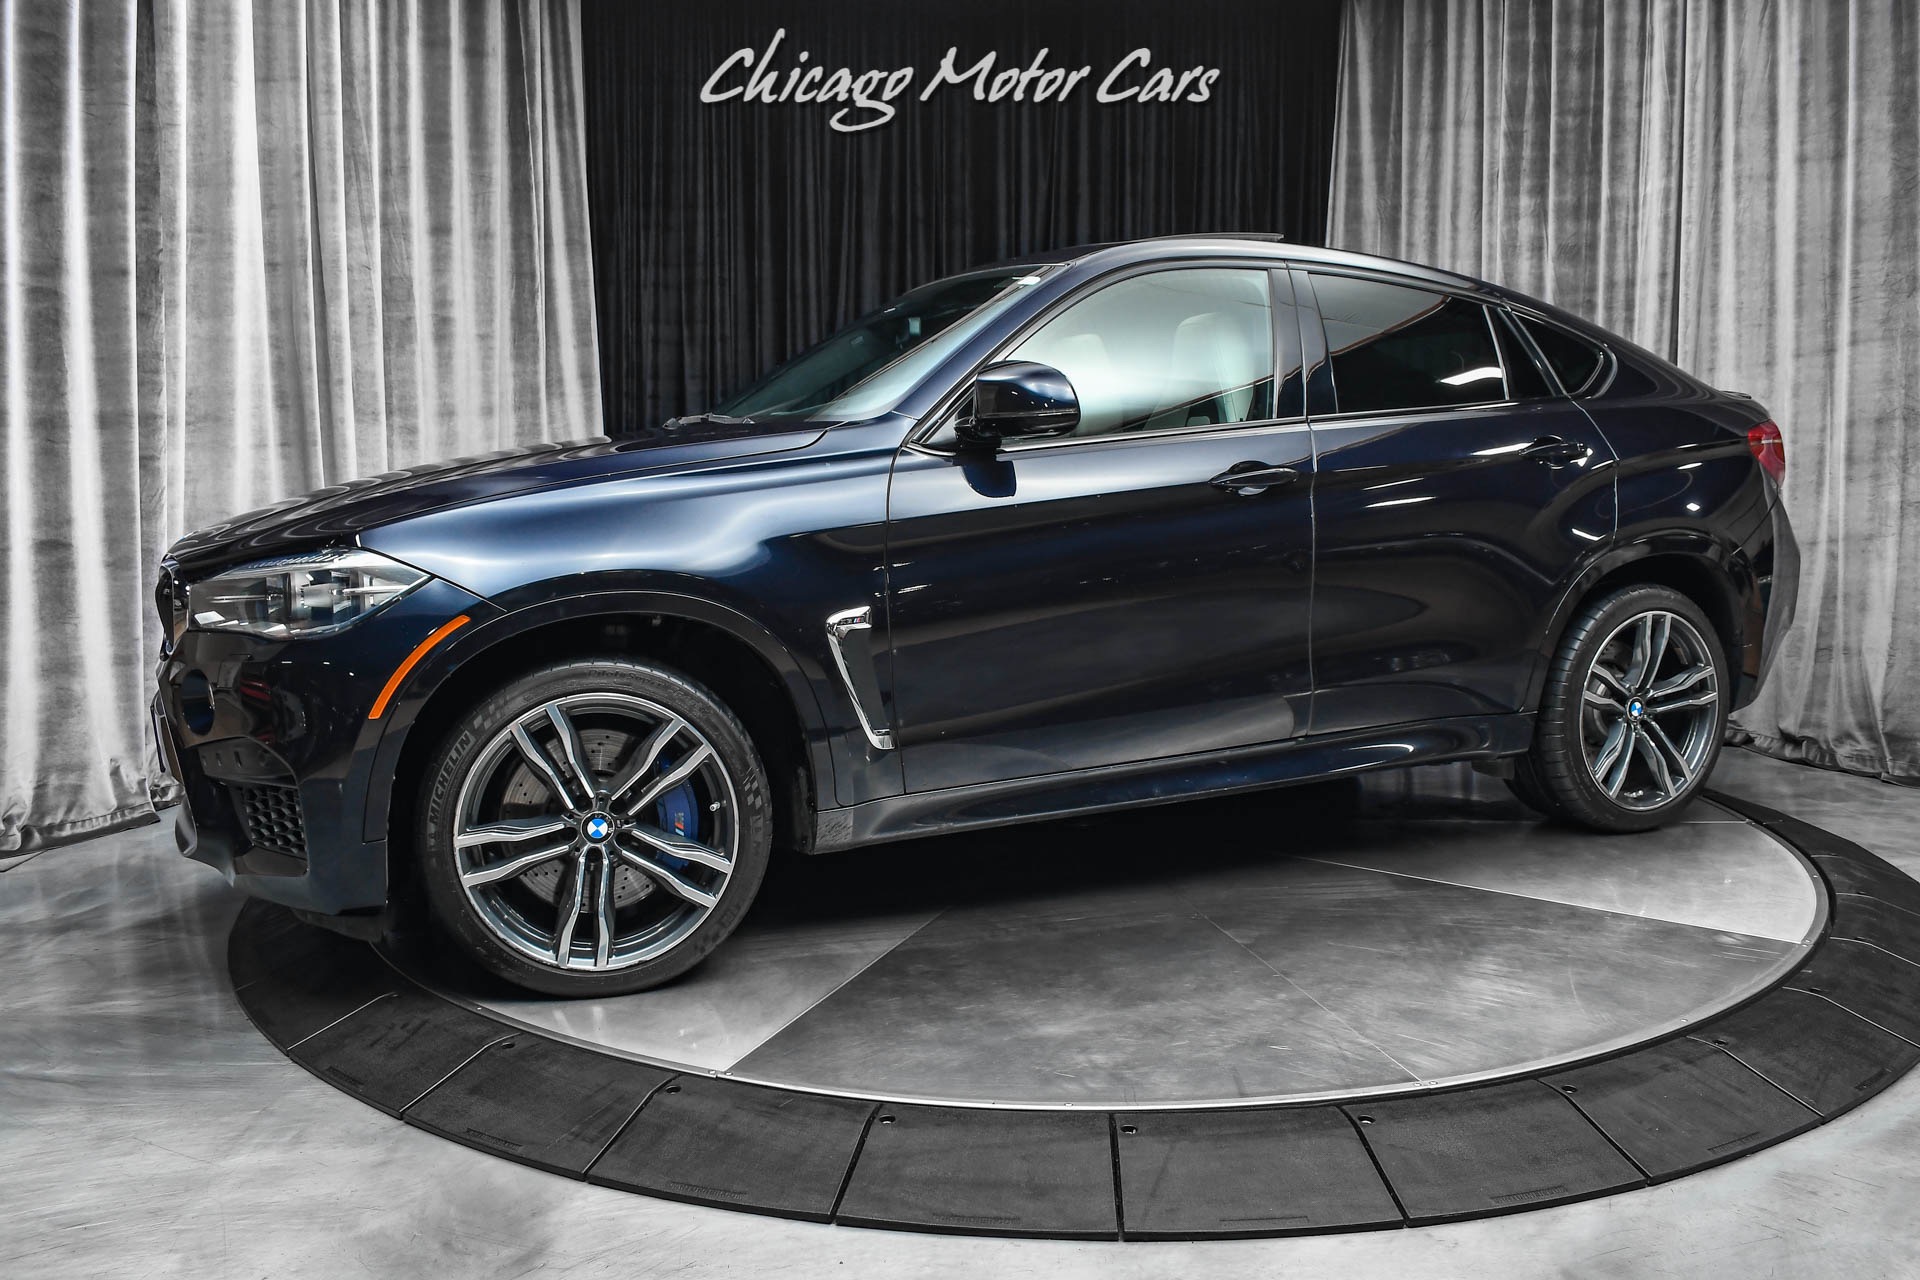 Used 2016 BMW X6 M SUV MSRP $117k+ Rear Entertainment! Executive Package!  LOADED! For Sale (Special Pricing) | Chicago Motor Cars Stock #18293A